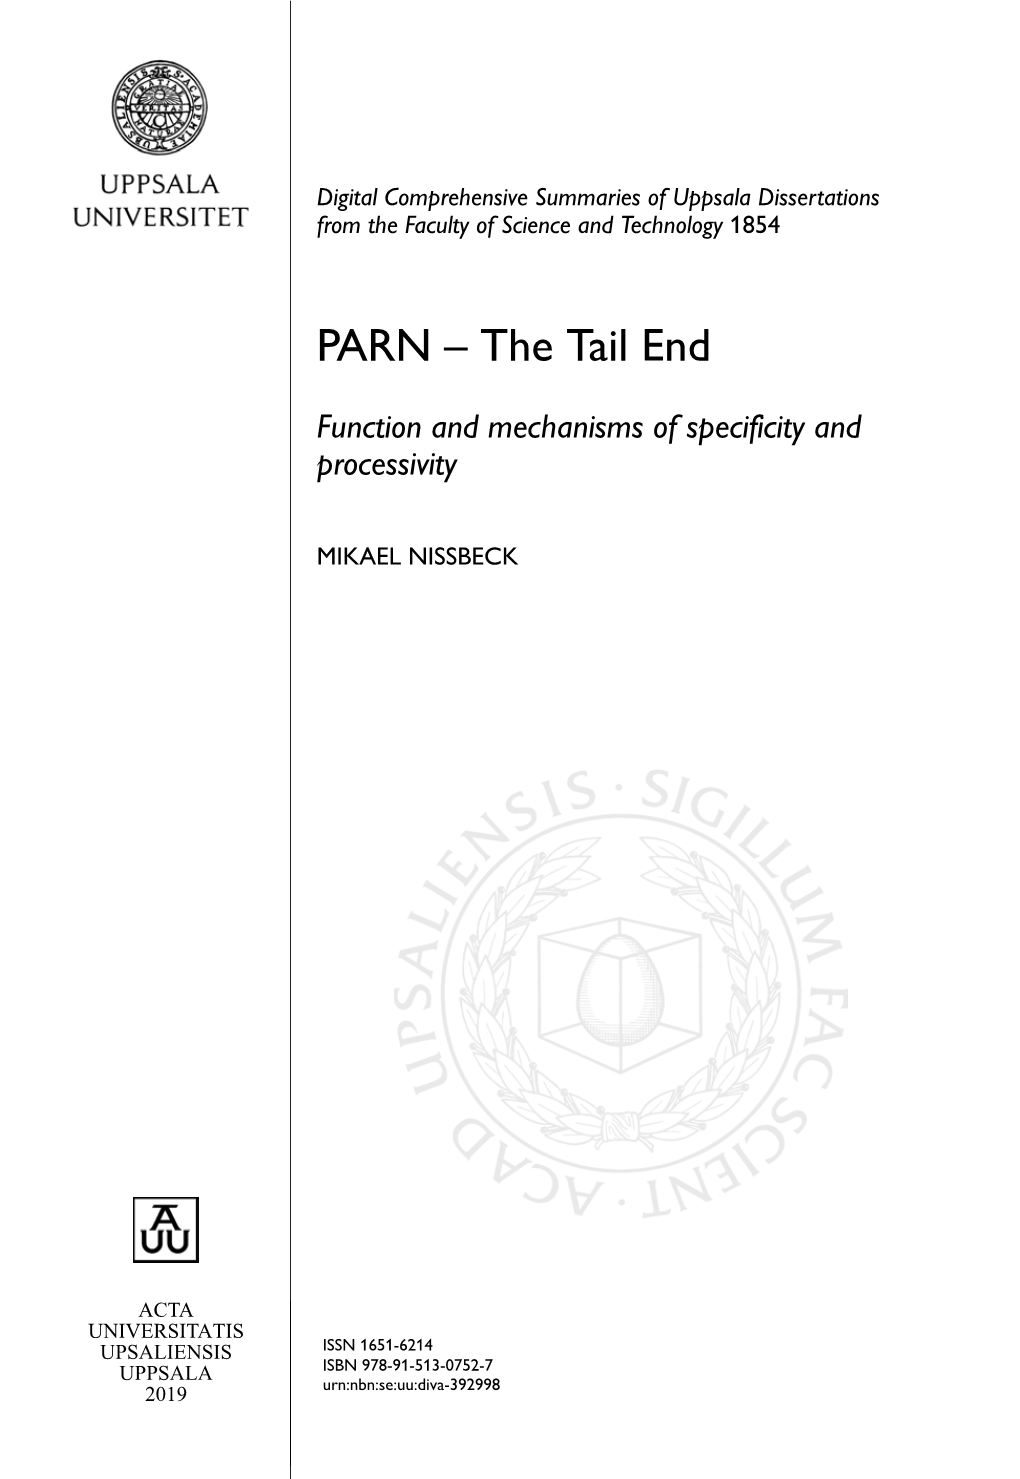 PARN – the Tail End